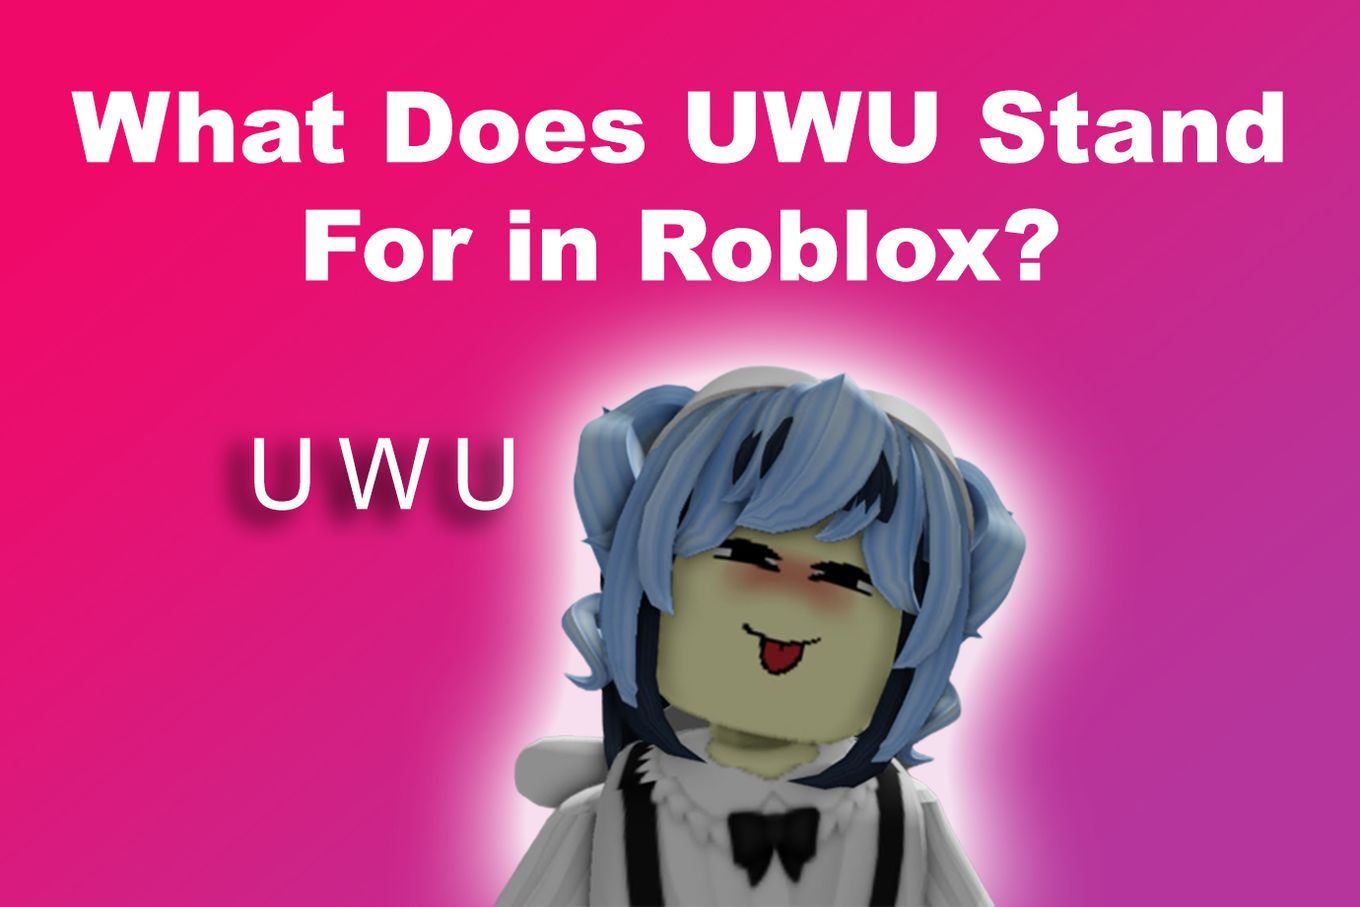 The meaning of UWU in Roblox